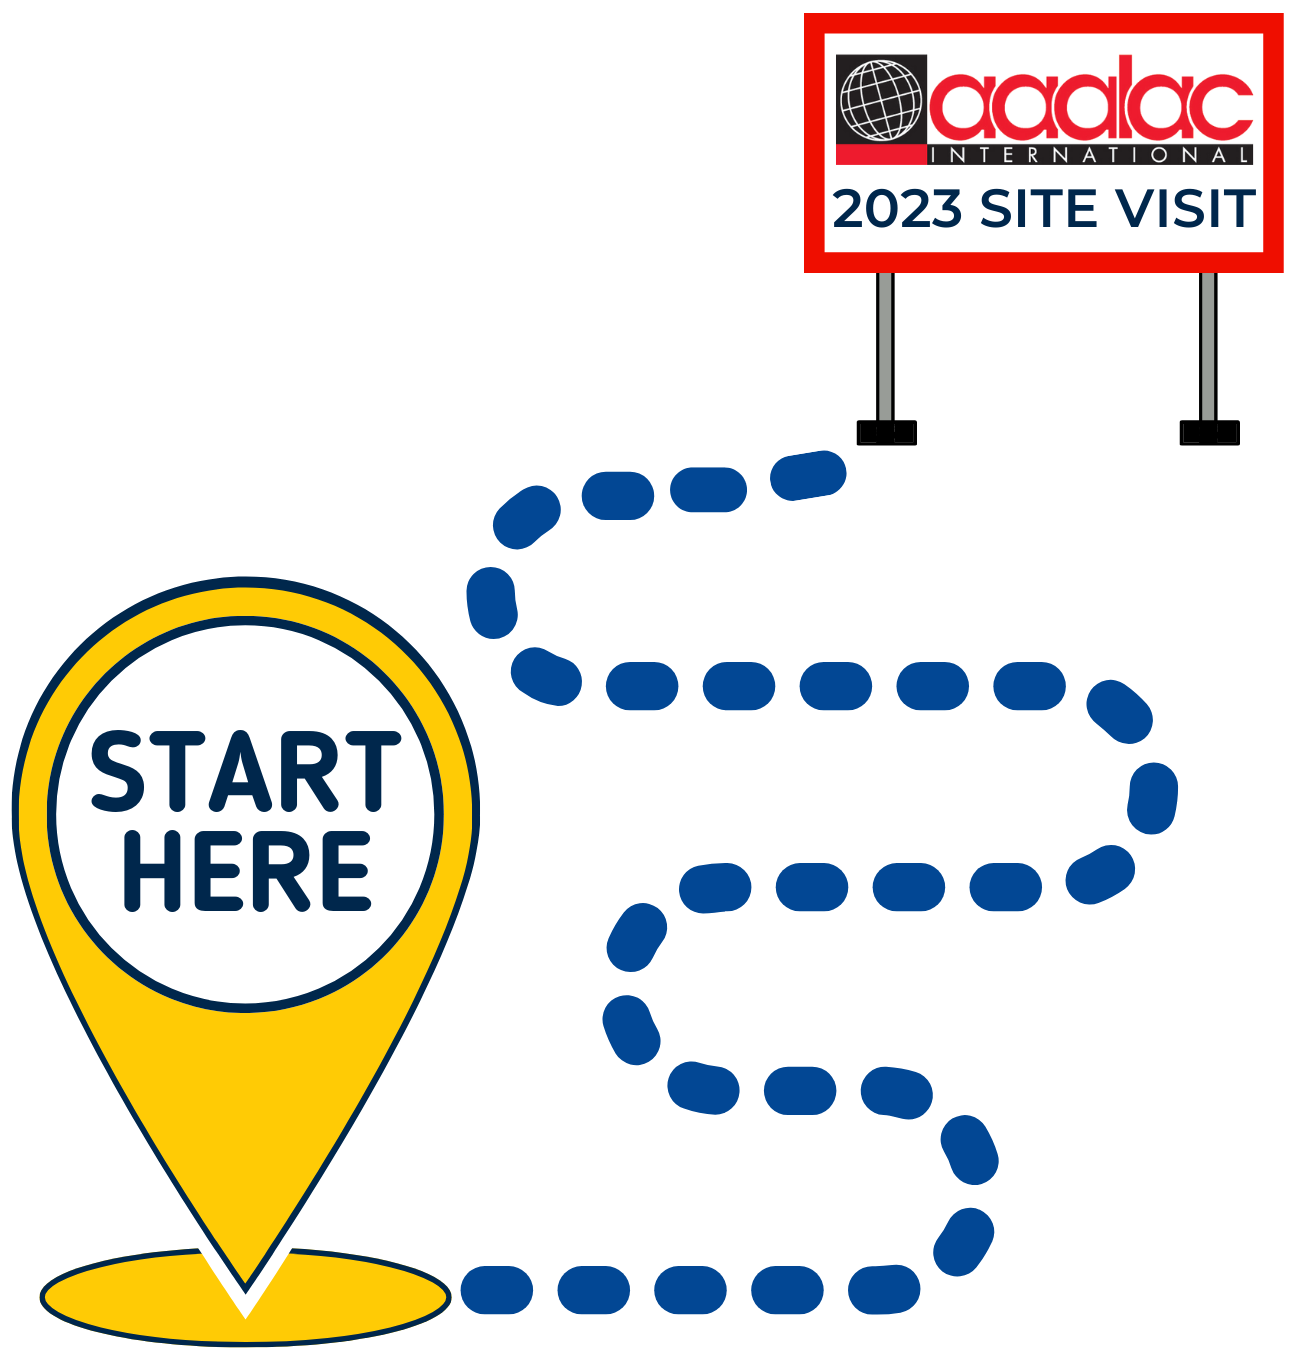 Yellow start here map icon with path to AAALAC 2023 Site Visit sign